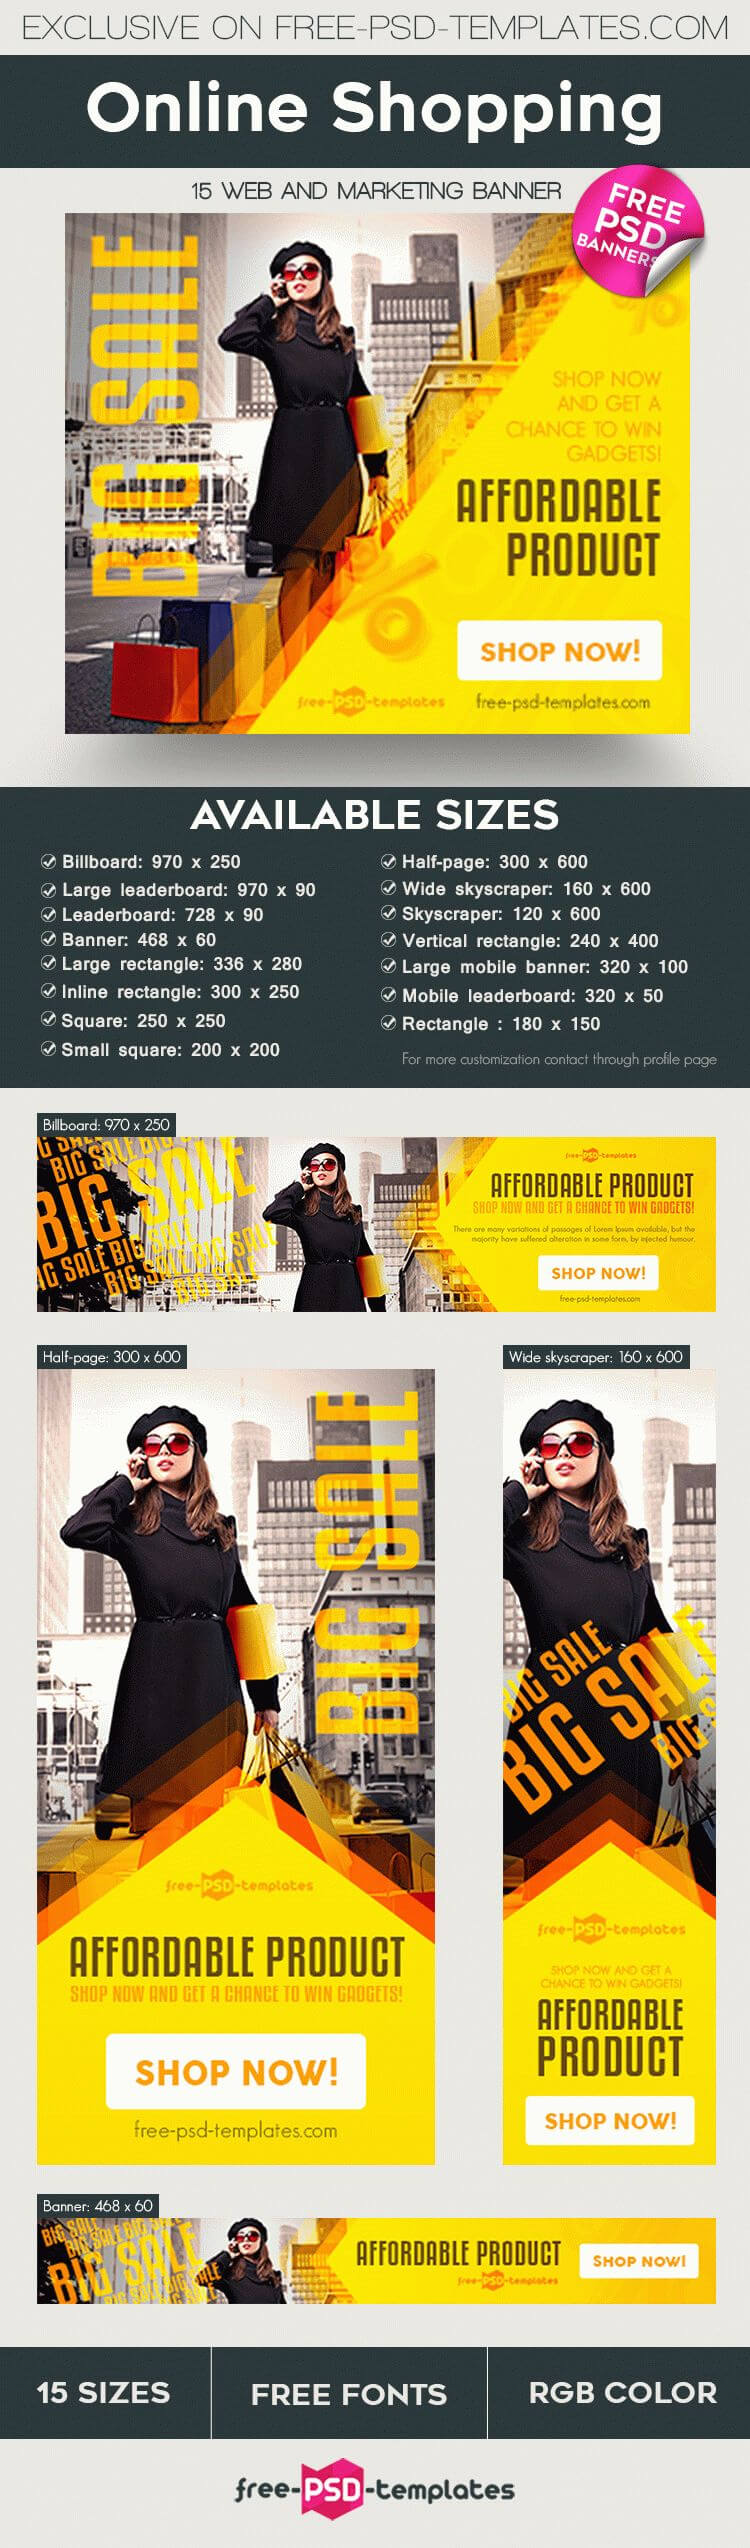 15 Free Online Shopping Banner In Psd | Free Psd Templates Throughout Free Online Banner Templates